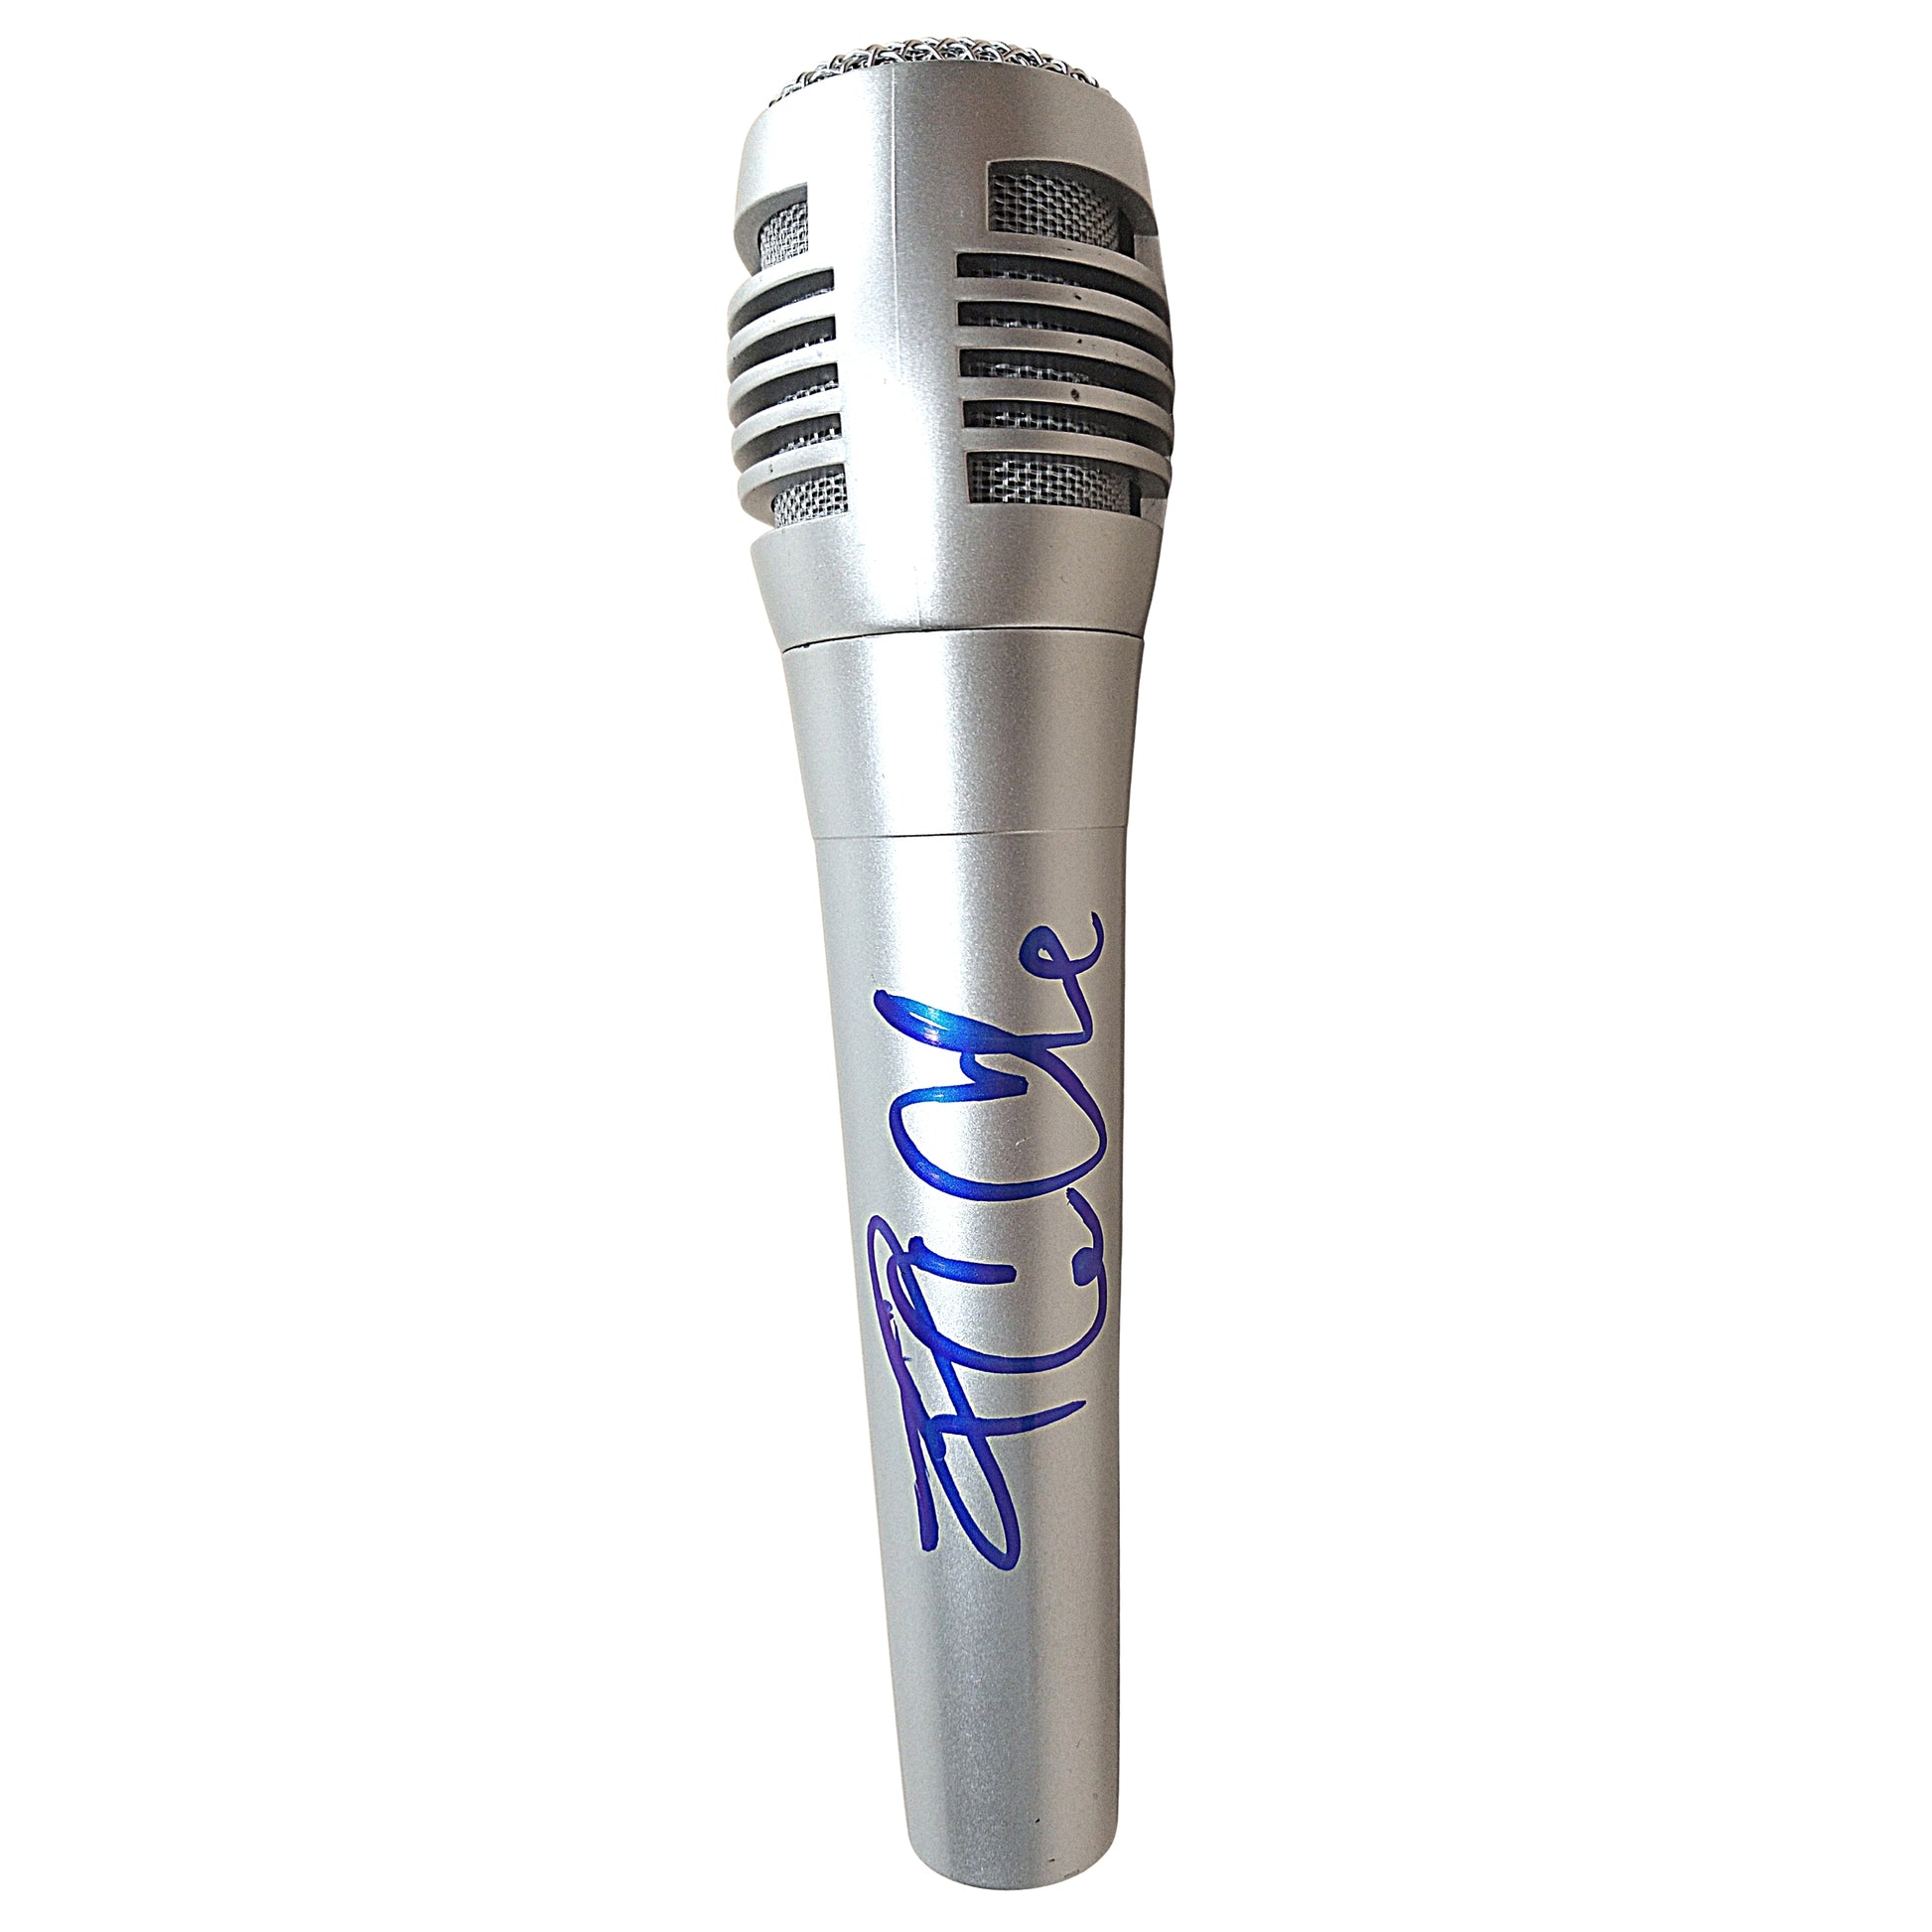 Music- Autographed- Ice Cube Signed Microphone NWA Rap Legend Exact Proof Photo Beckett Authentication 204